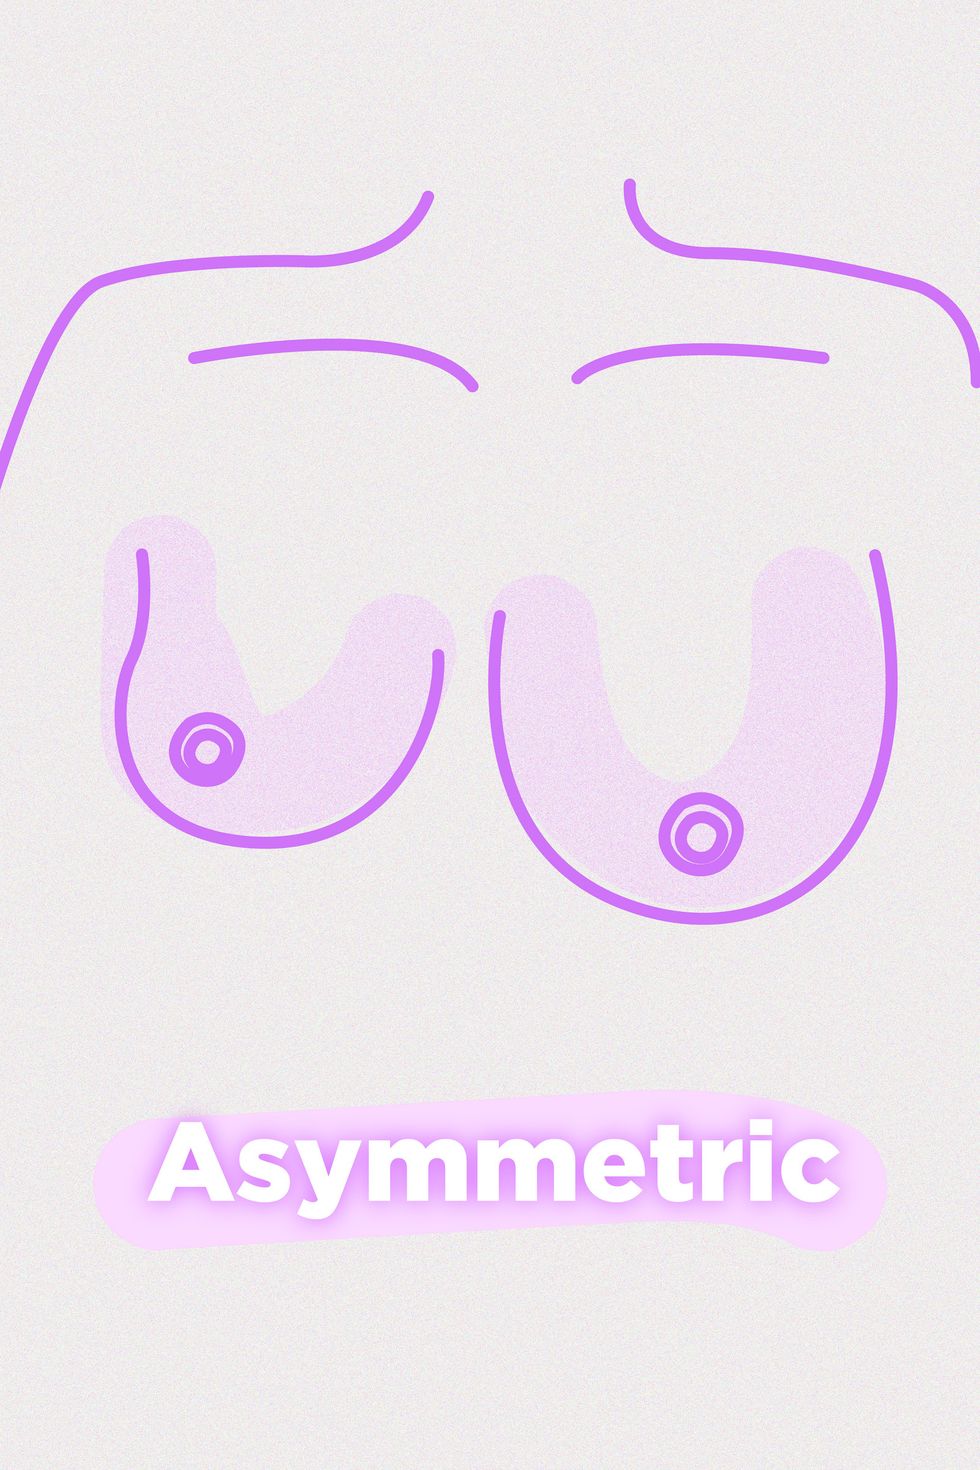 Apparently There Are 7 Types Of Breasts—Which Do You Have